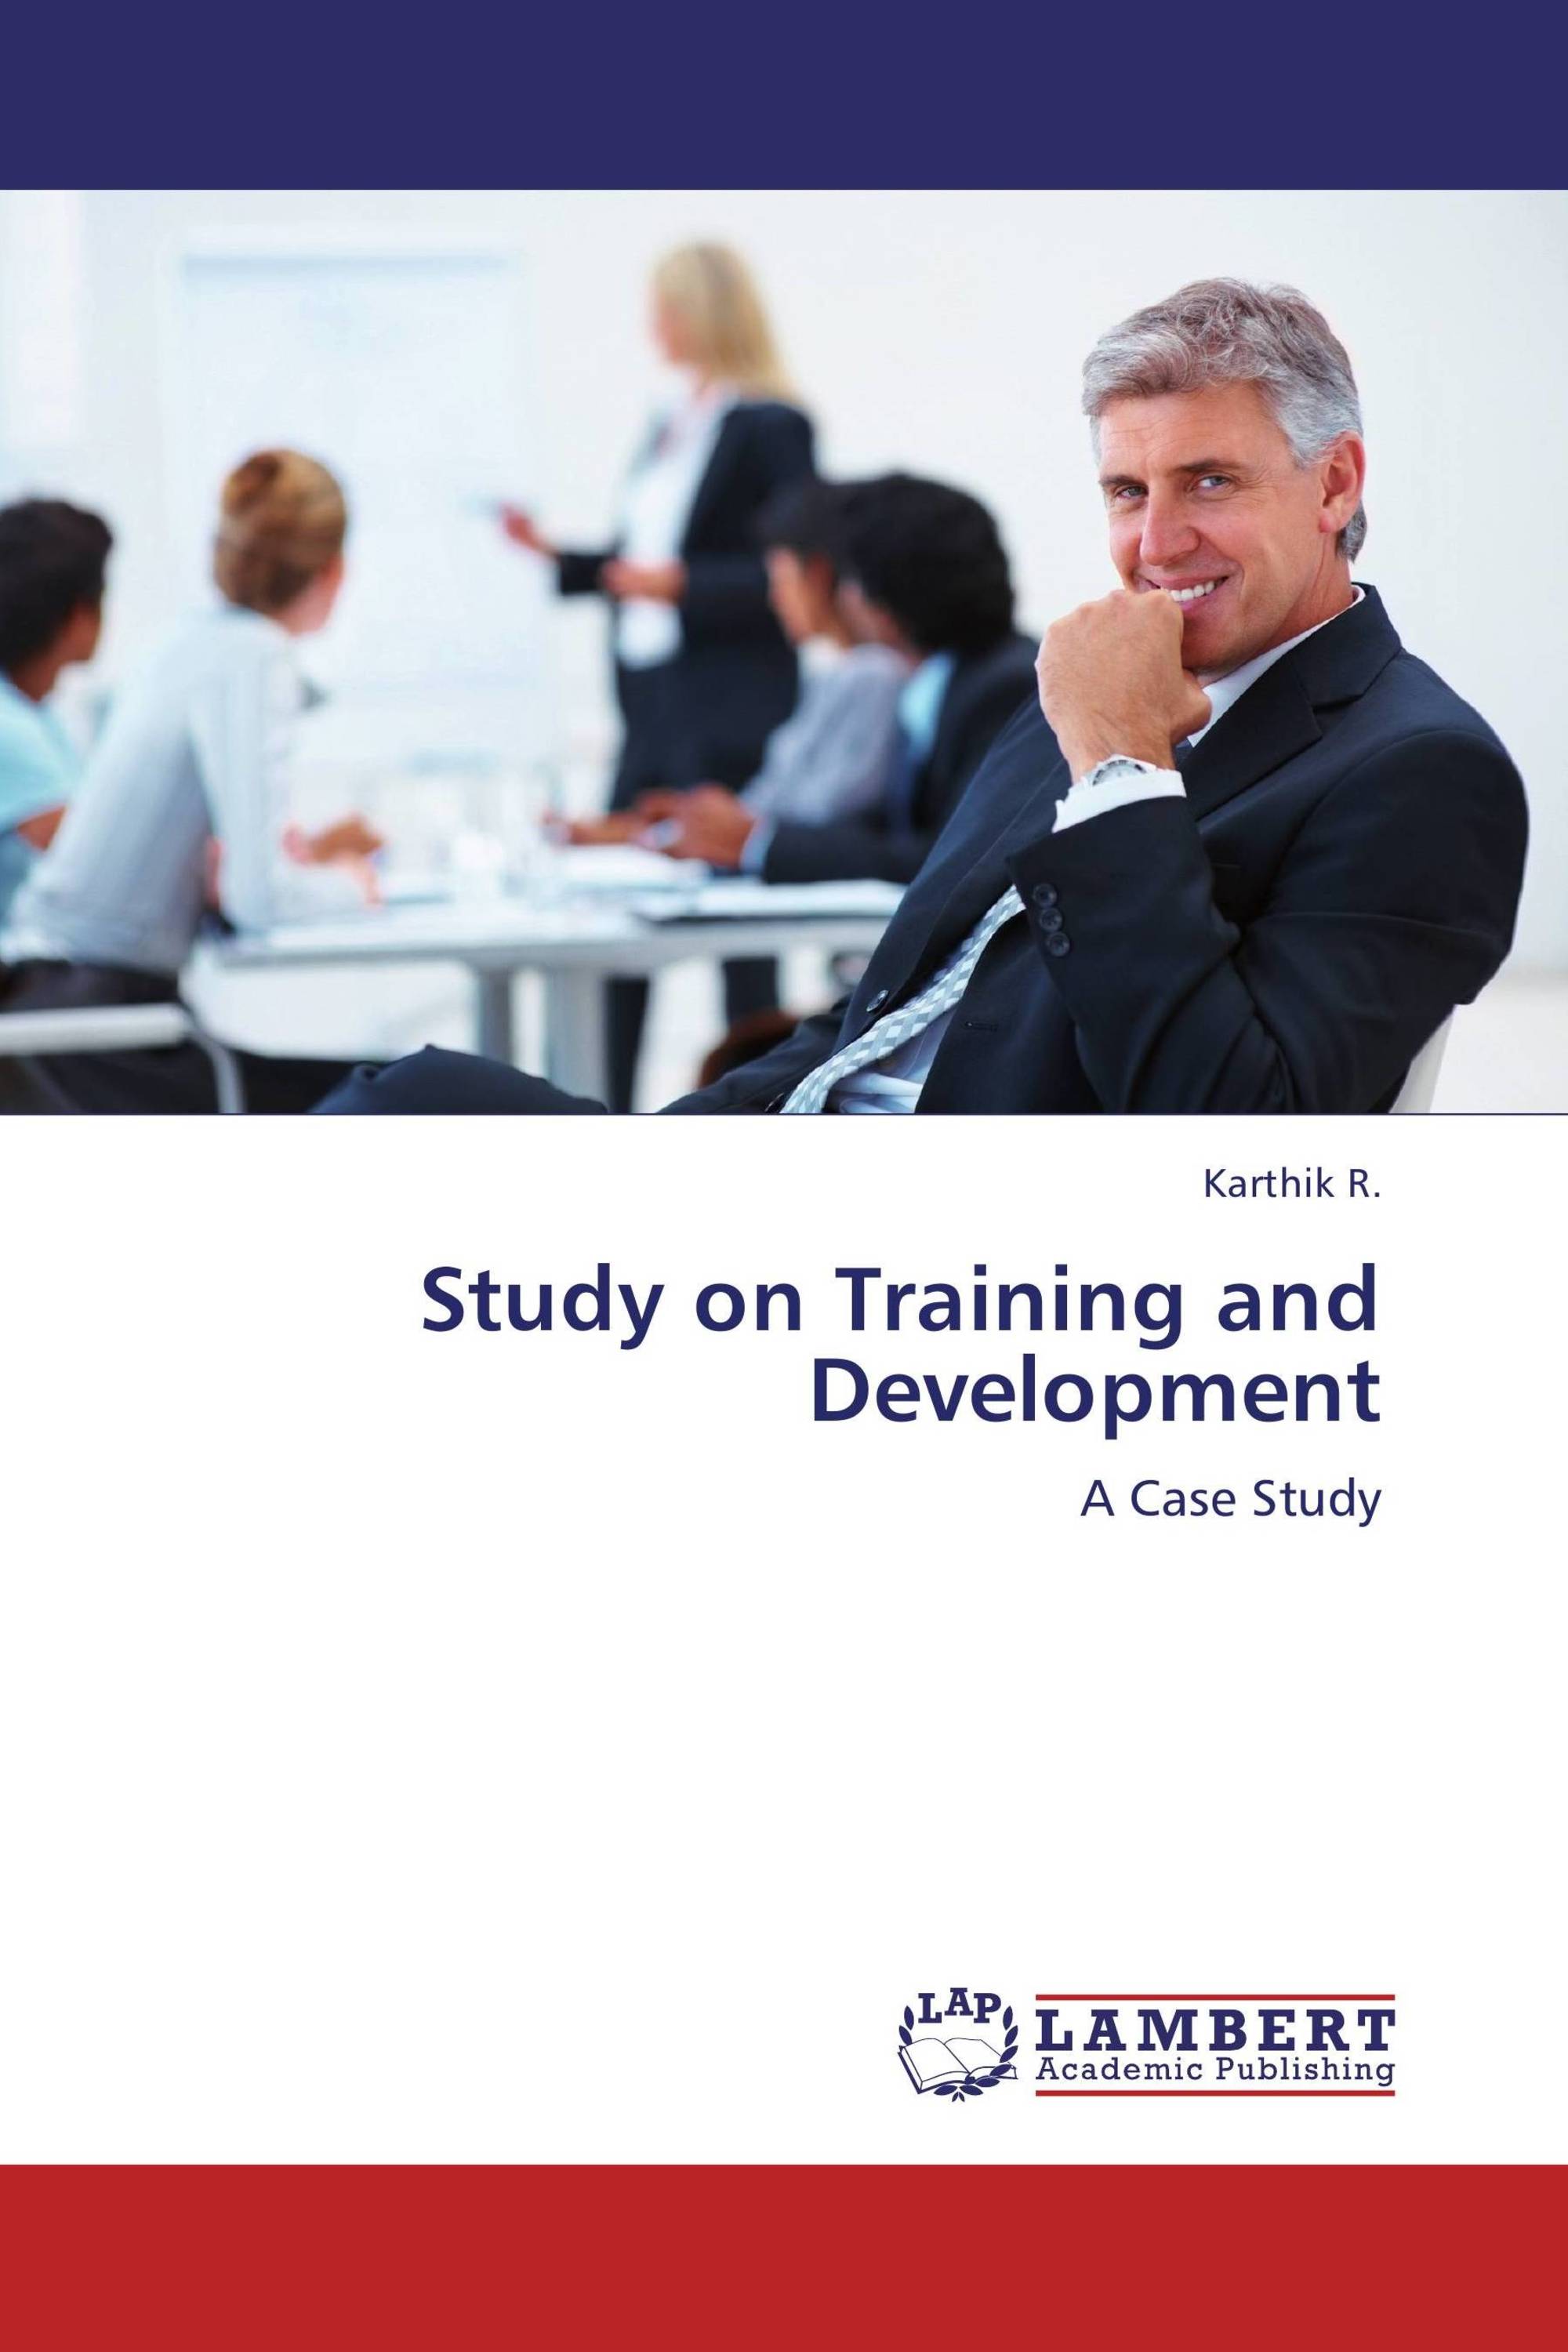 research paper on training and development